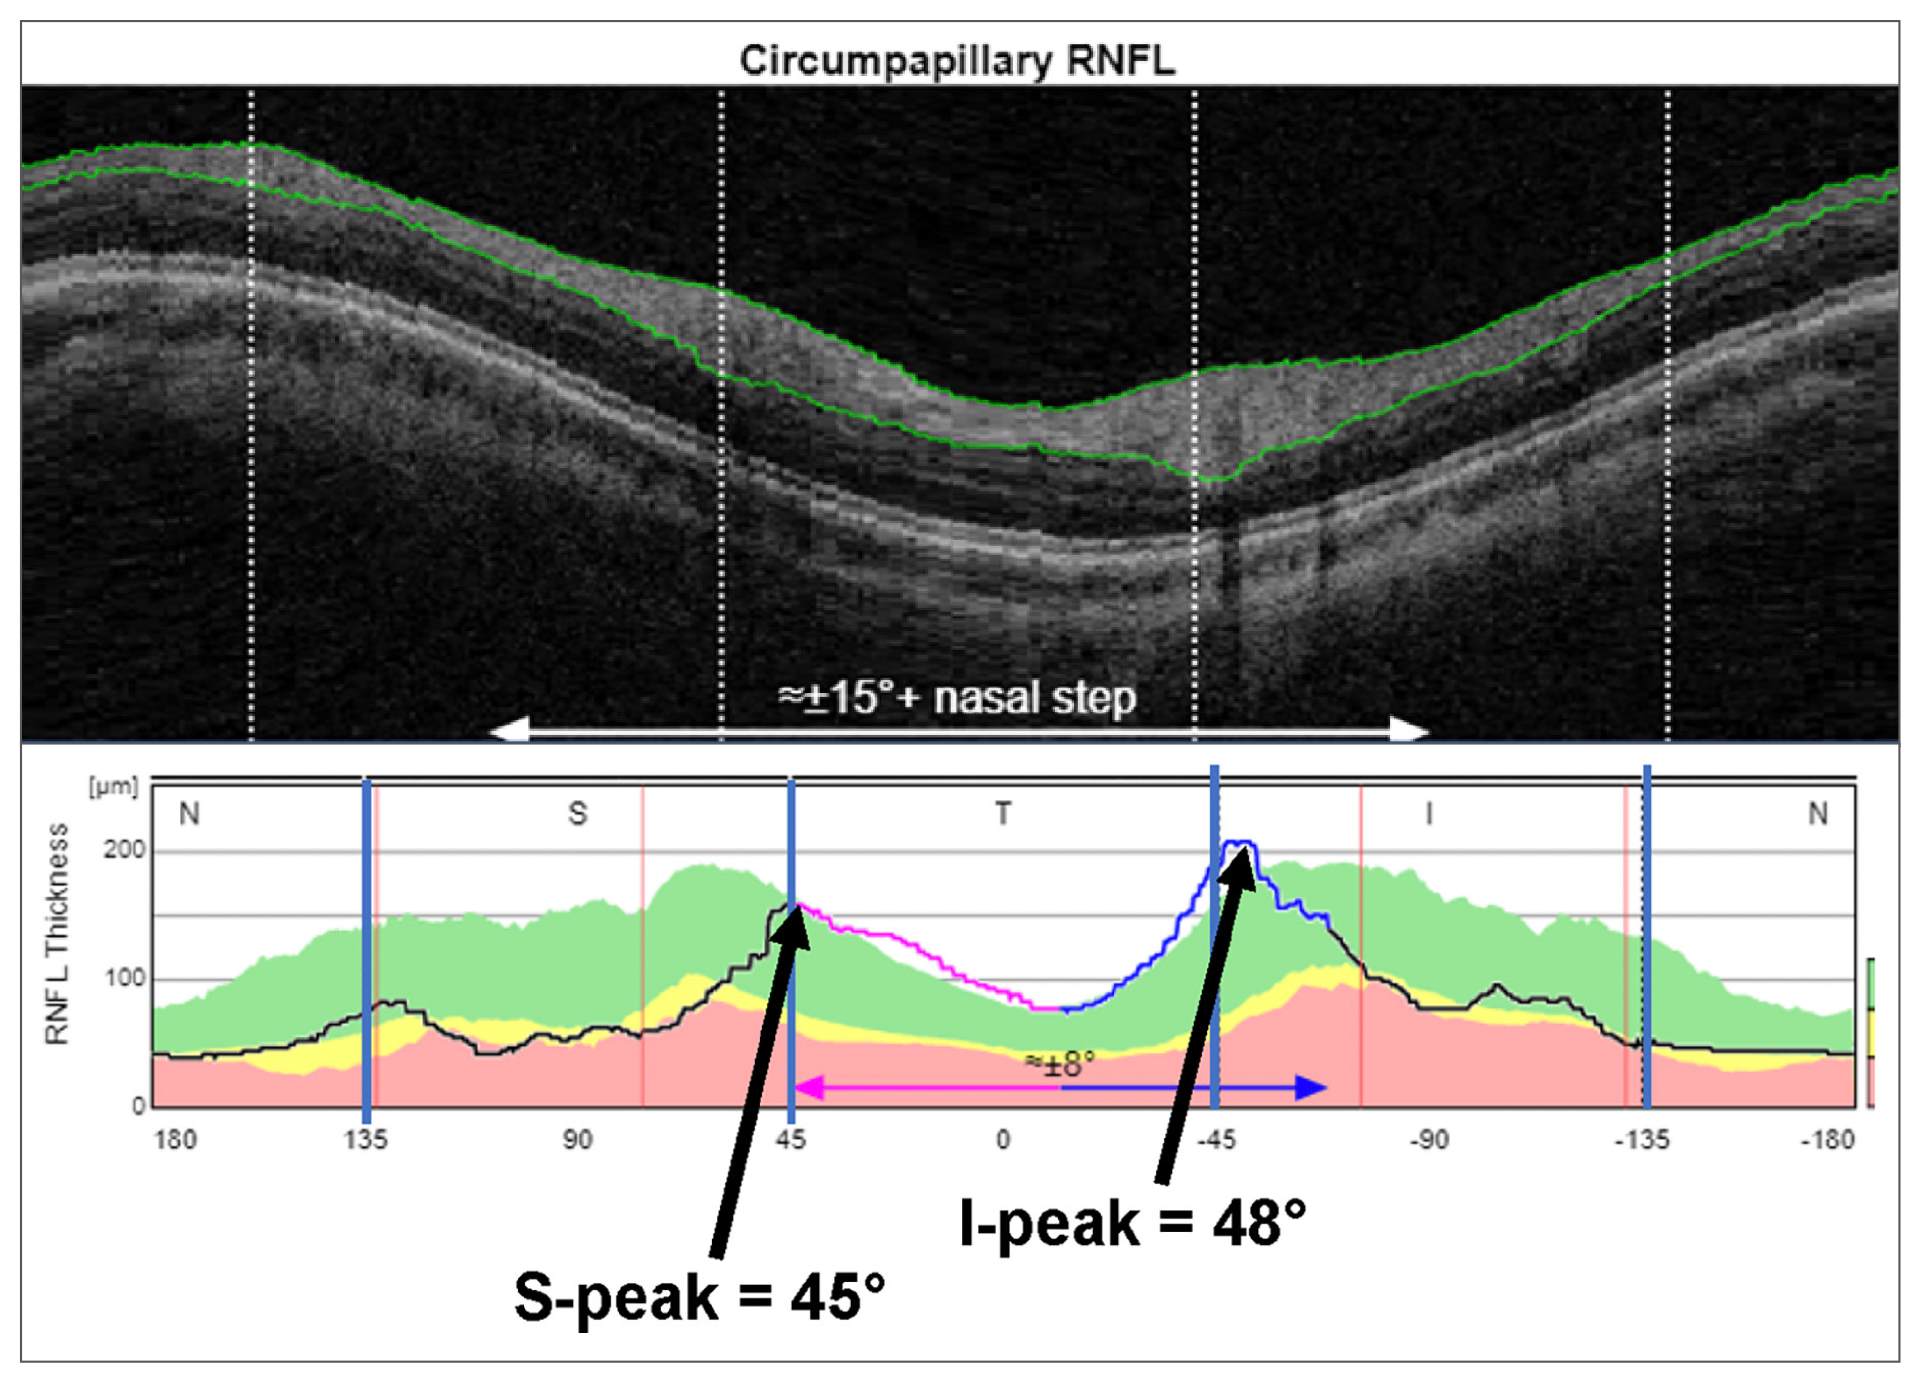 This image from the study shows the location of the superior and inferior peaks of the cpRNFL thickness curve, two of the four parameters associated with abnormal RNFL values in healthy eyes. 